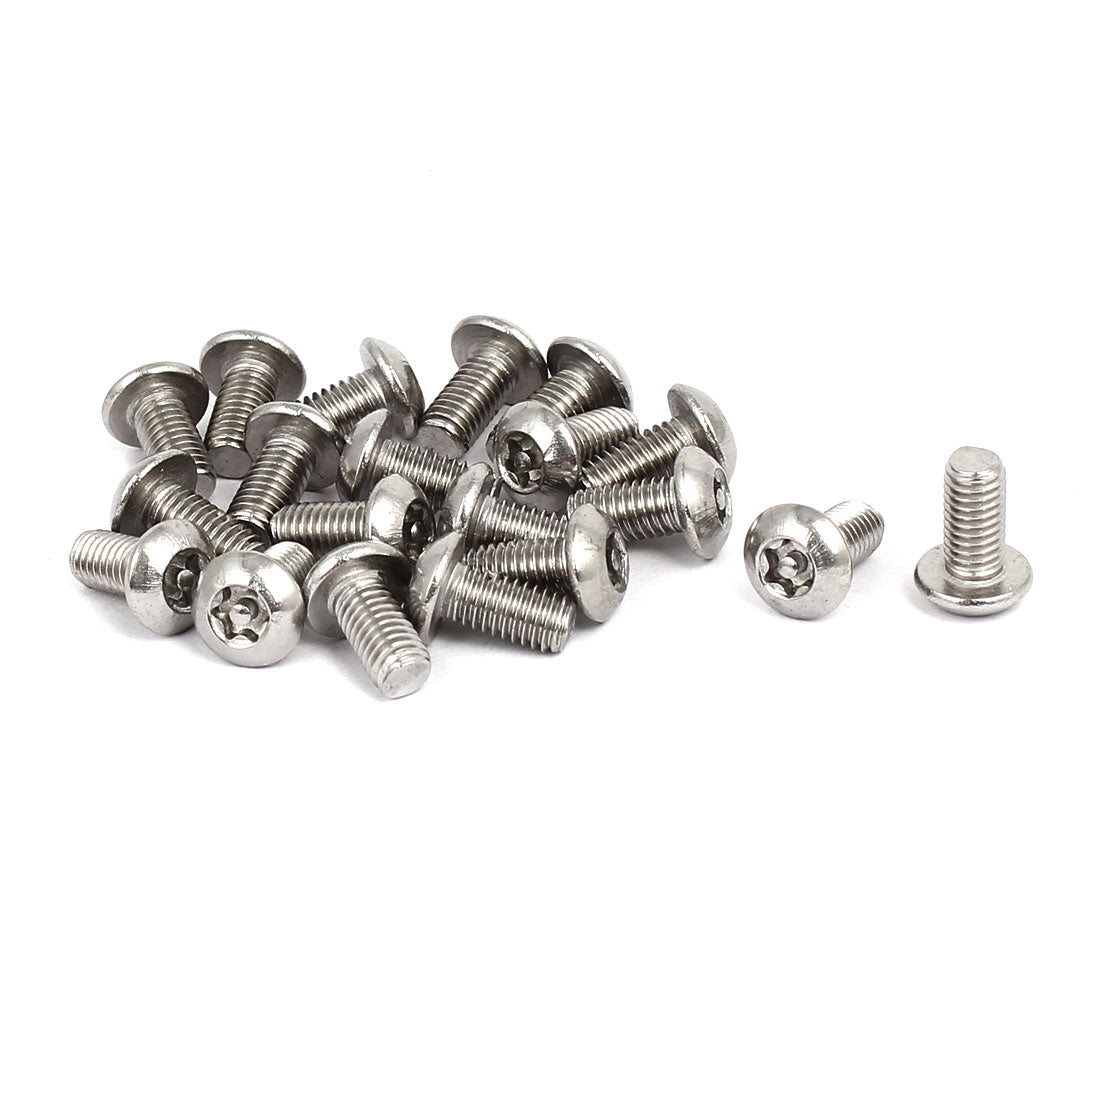 uxcell Uxcell M5x10mm 304 Stainless Steel Button Head Torx Security Tamper Proof Screws 20pcs